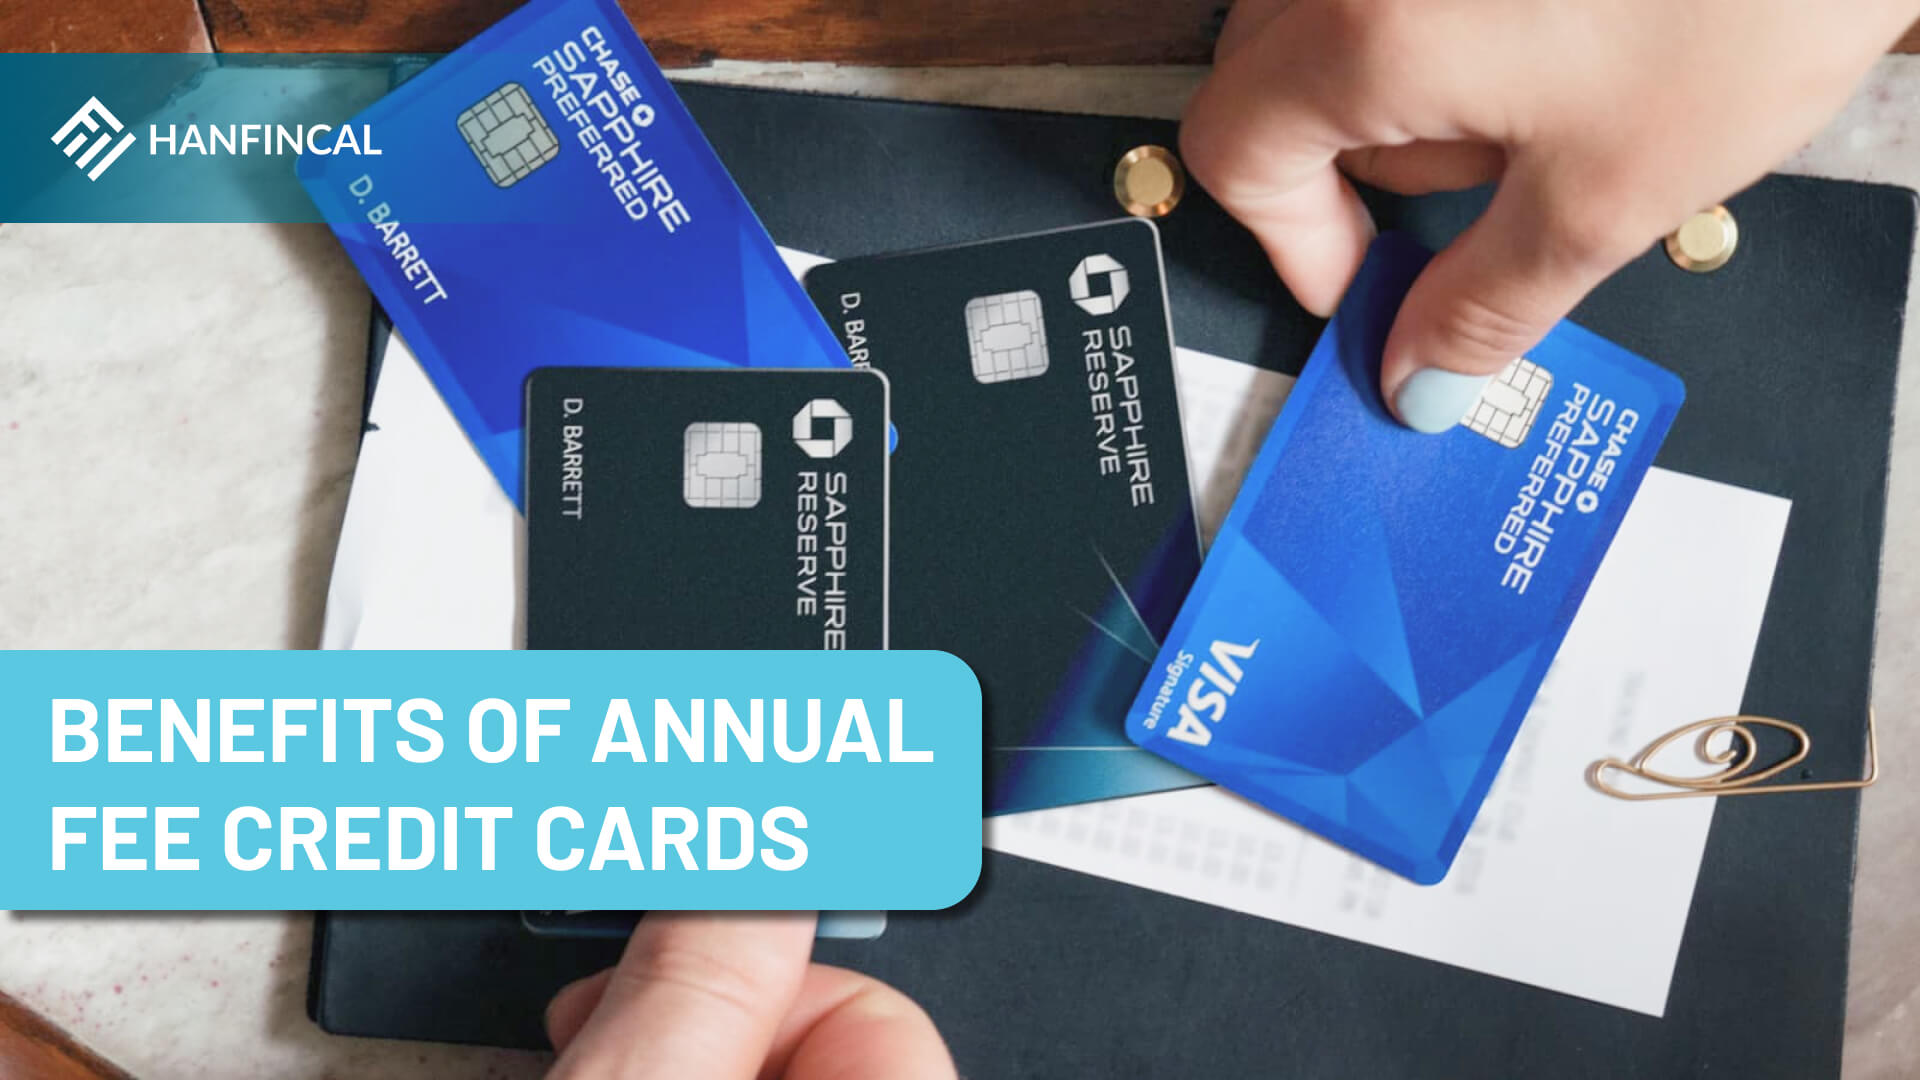 Benefits of annual fee credit cards